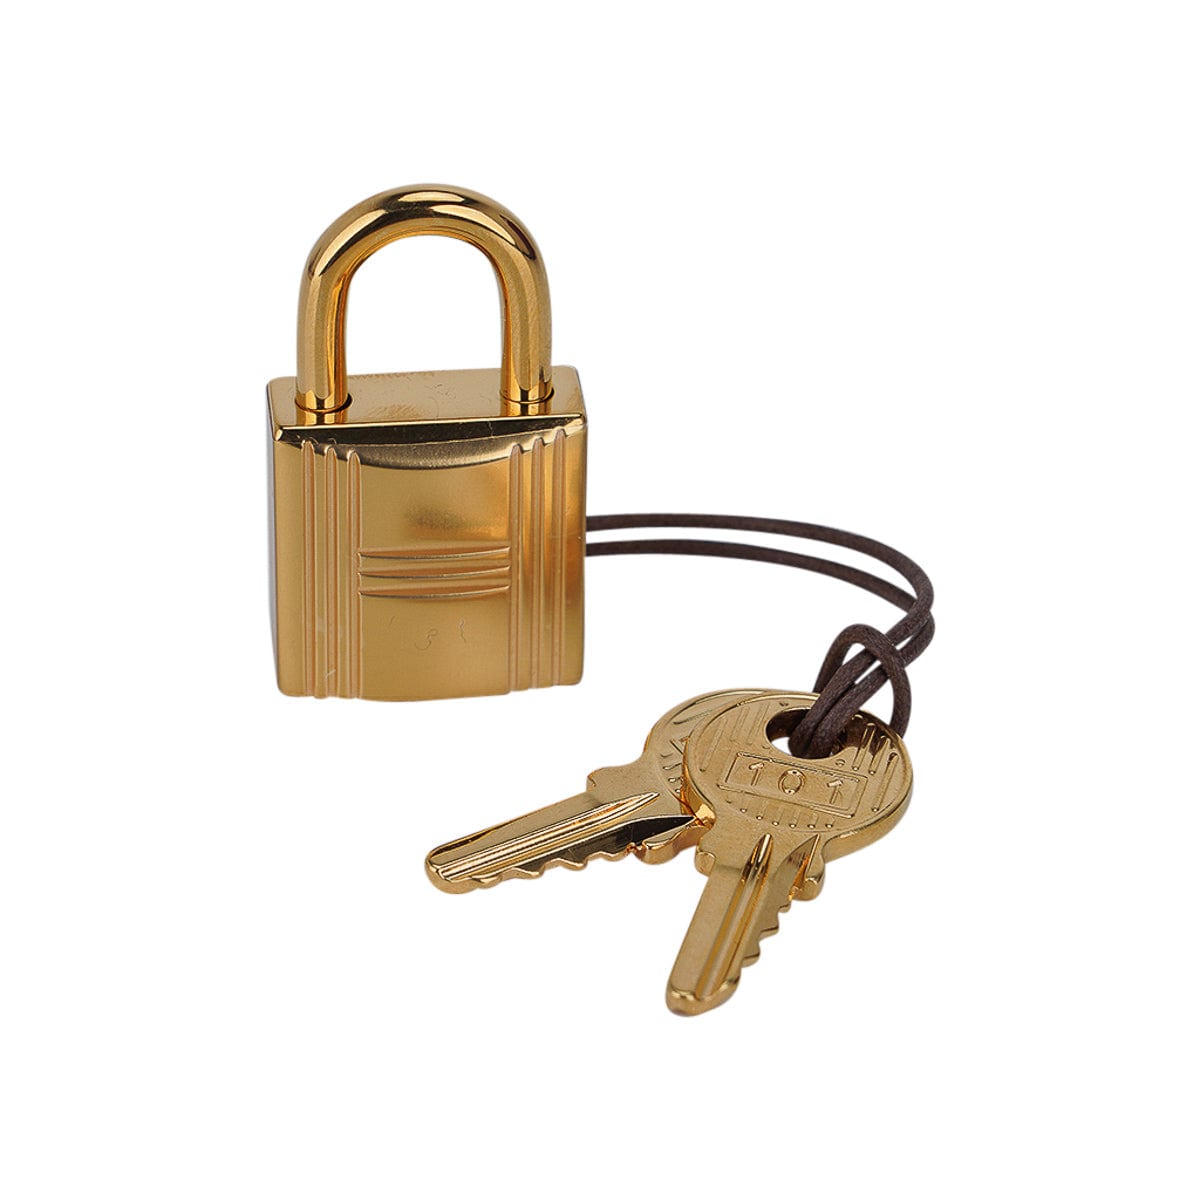 Hermes Lock 18 Bag Anemone Gold Hardware Clemence Leather – Mightychic